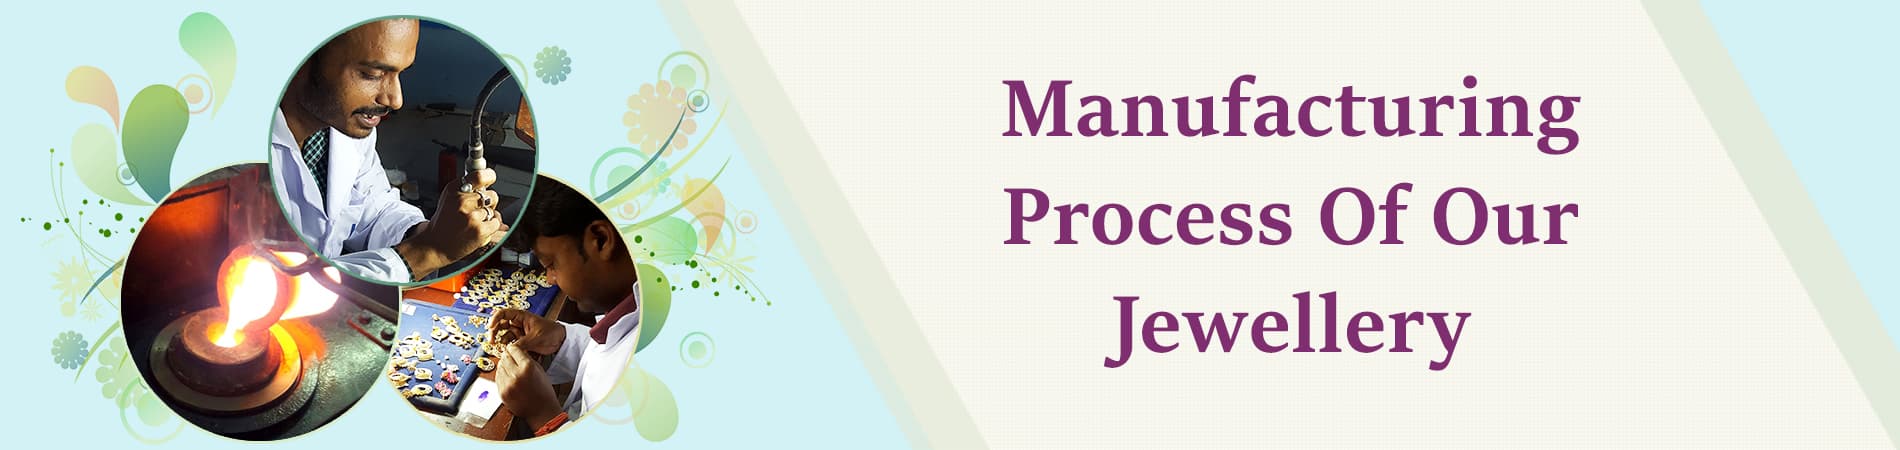 1586150775_Manufacturing_Process_Of_Our_Jewellery.jpg